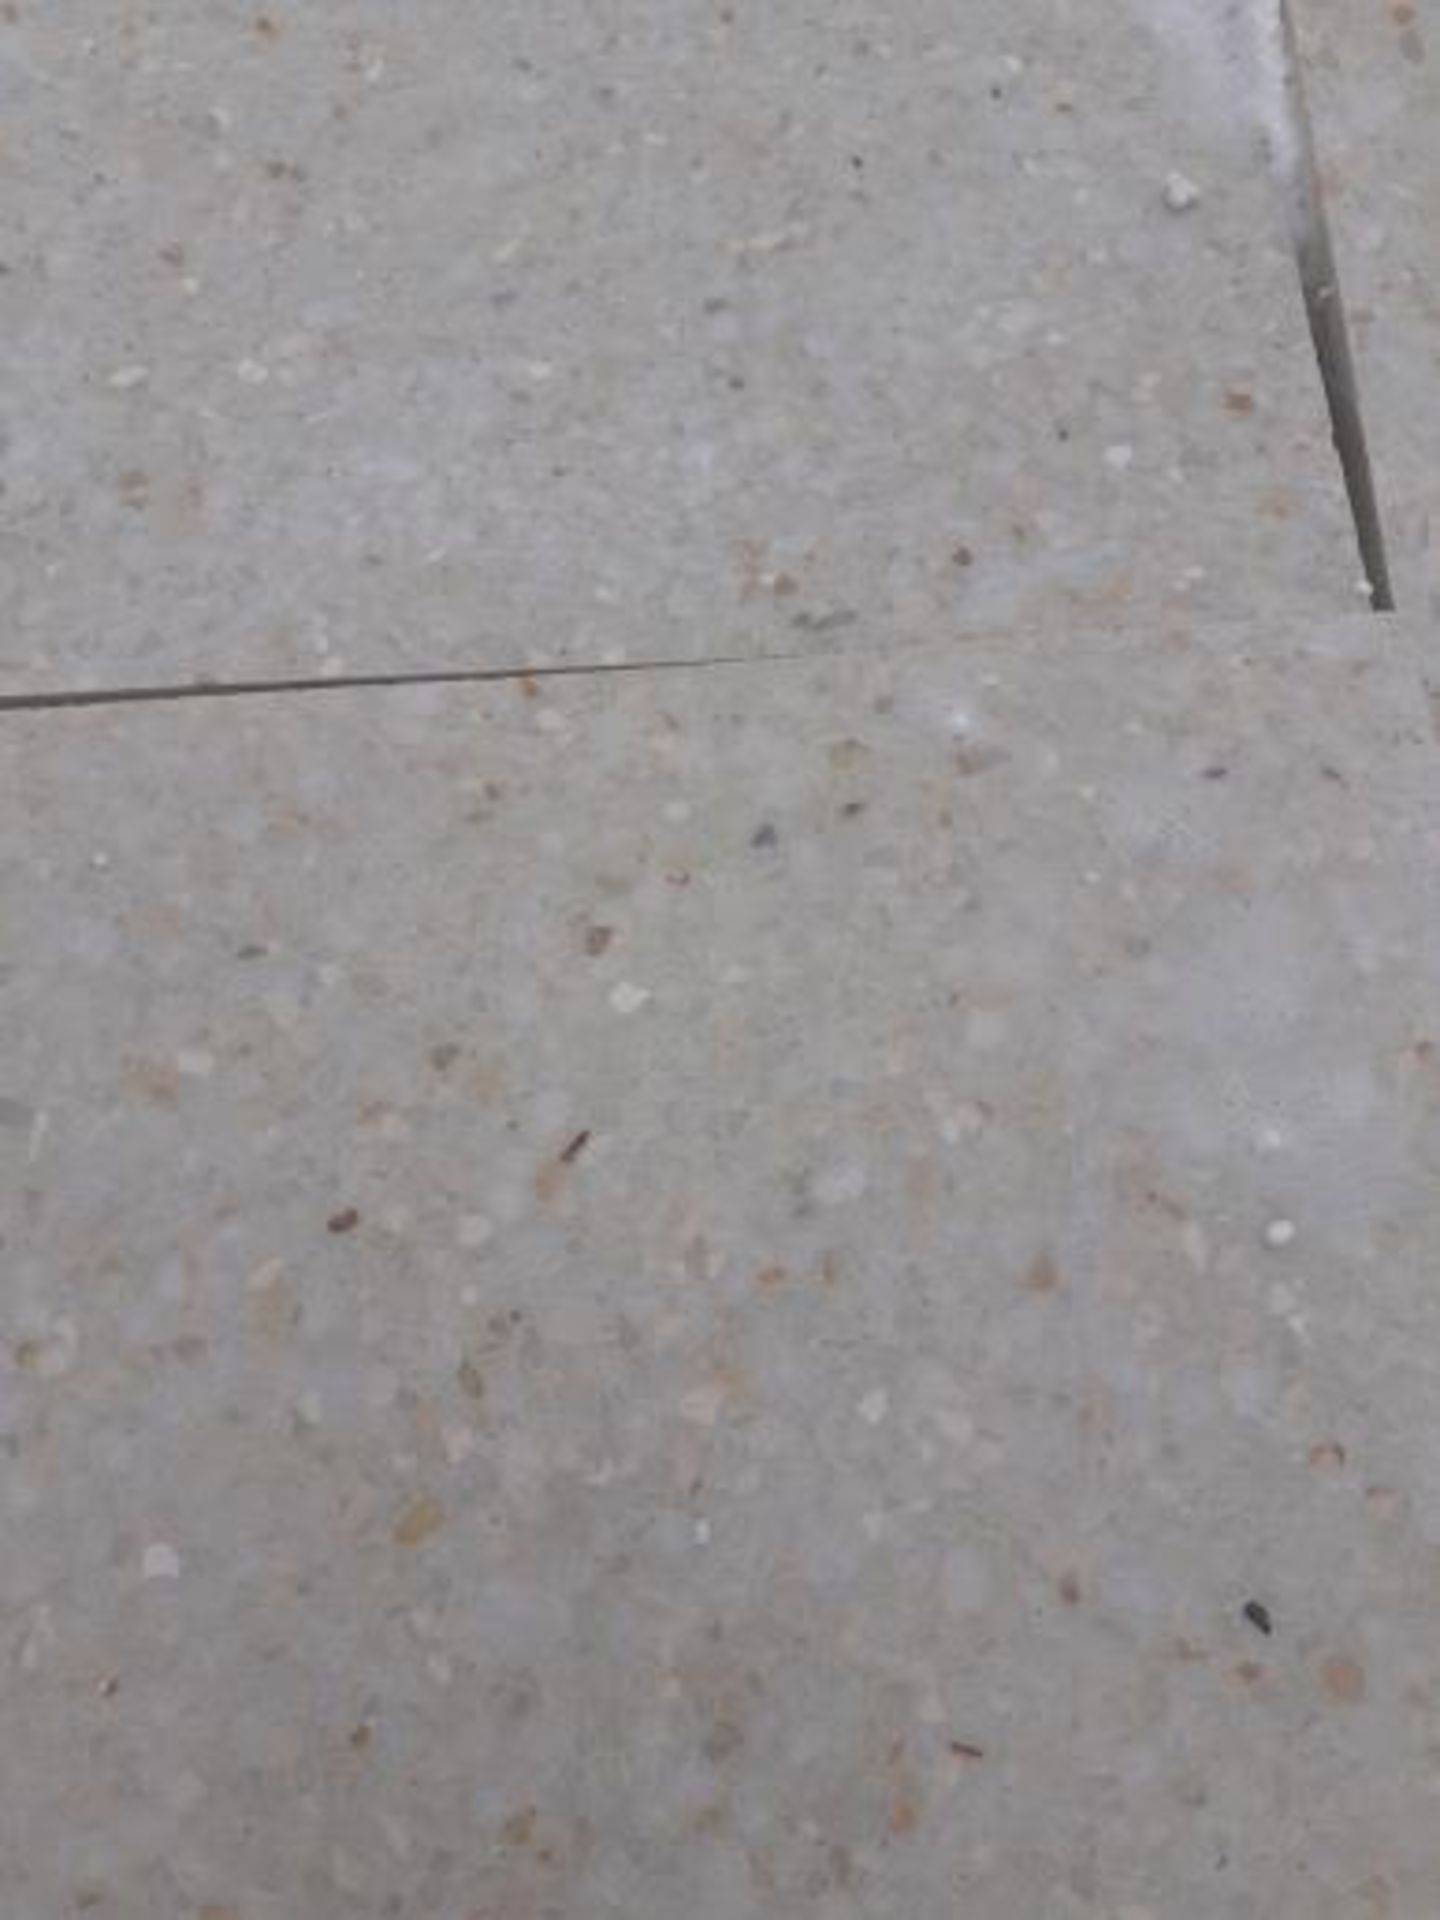 1 PALLET OF BRAND NEW TERRAZZO COMMERCIAL FLOOR TILES (Z30011), COVERS 24 SQUARE YARDS *PLUS VAT* - Image 8 of 14